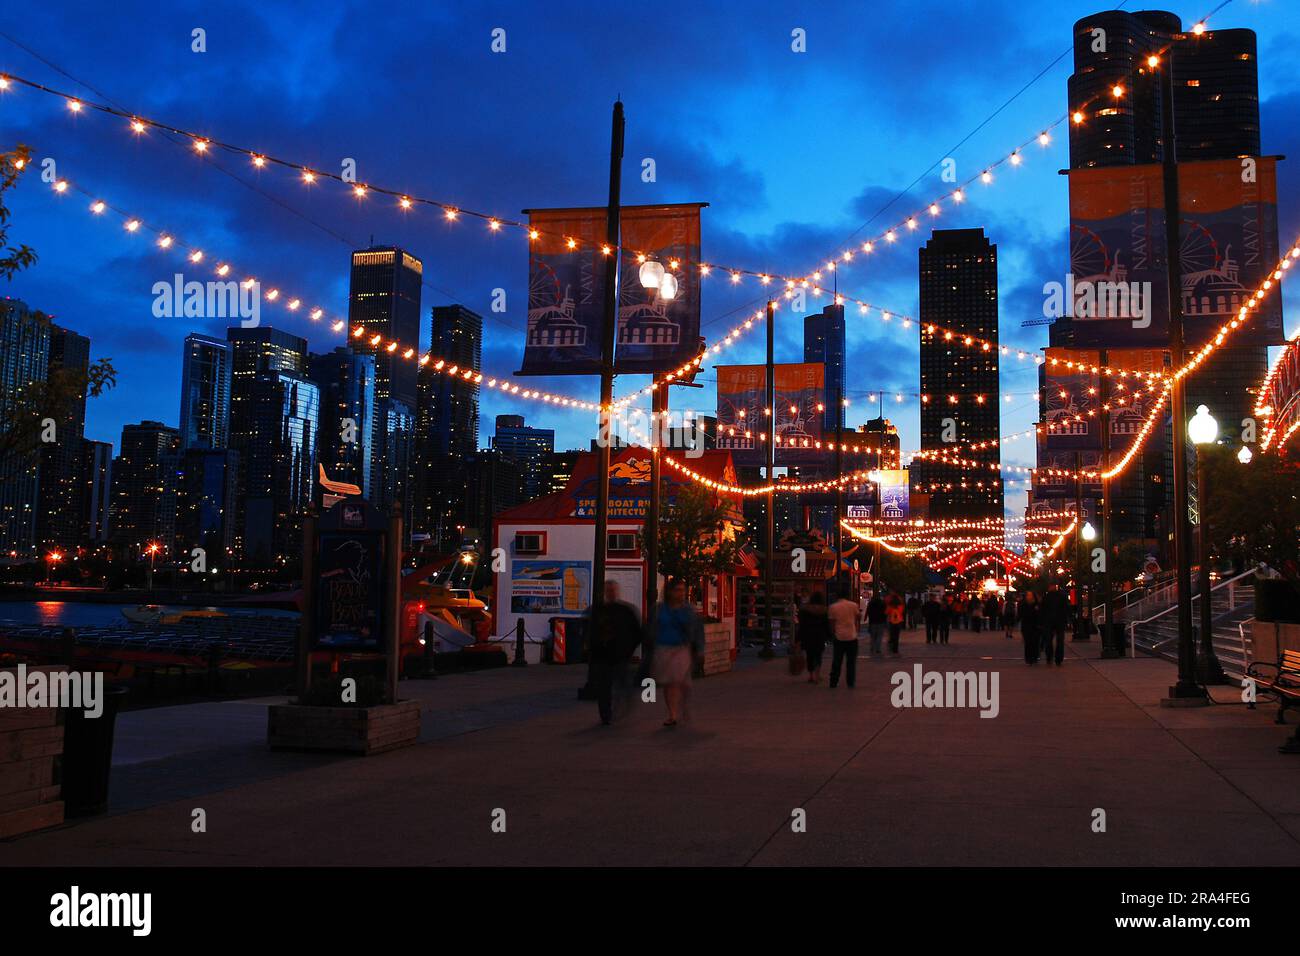 Lights are strung over the pedestrian way brings more light to a dusk scene in Navy Pier in Chicago Stock Photo